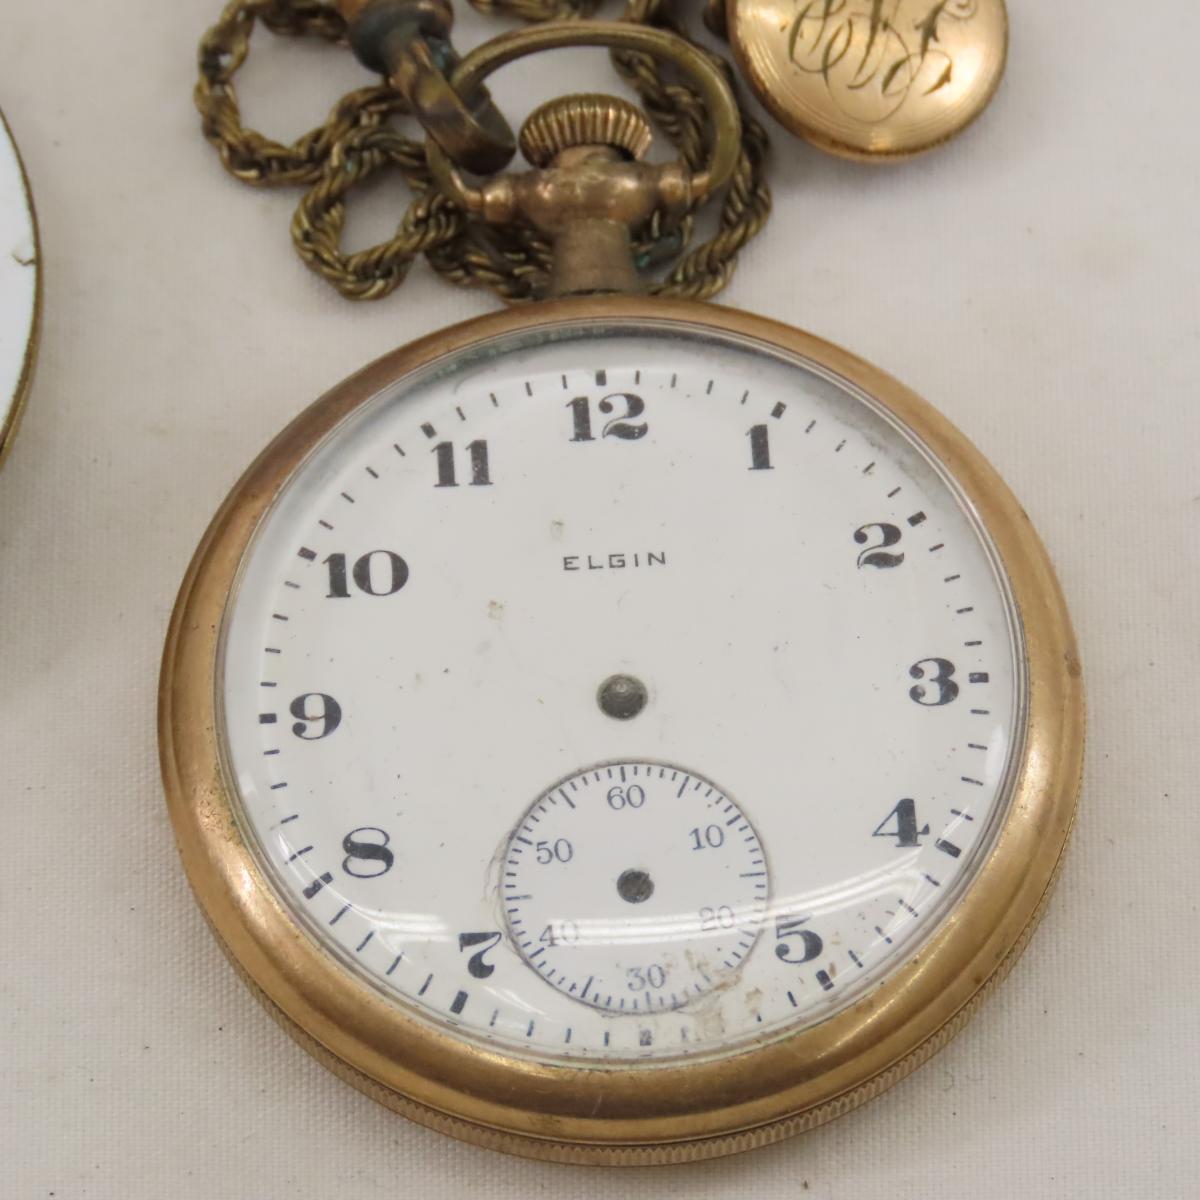 8 Assorted Pocket Watches for Repair